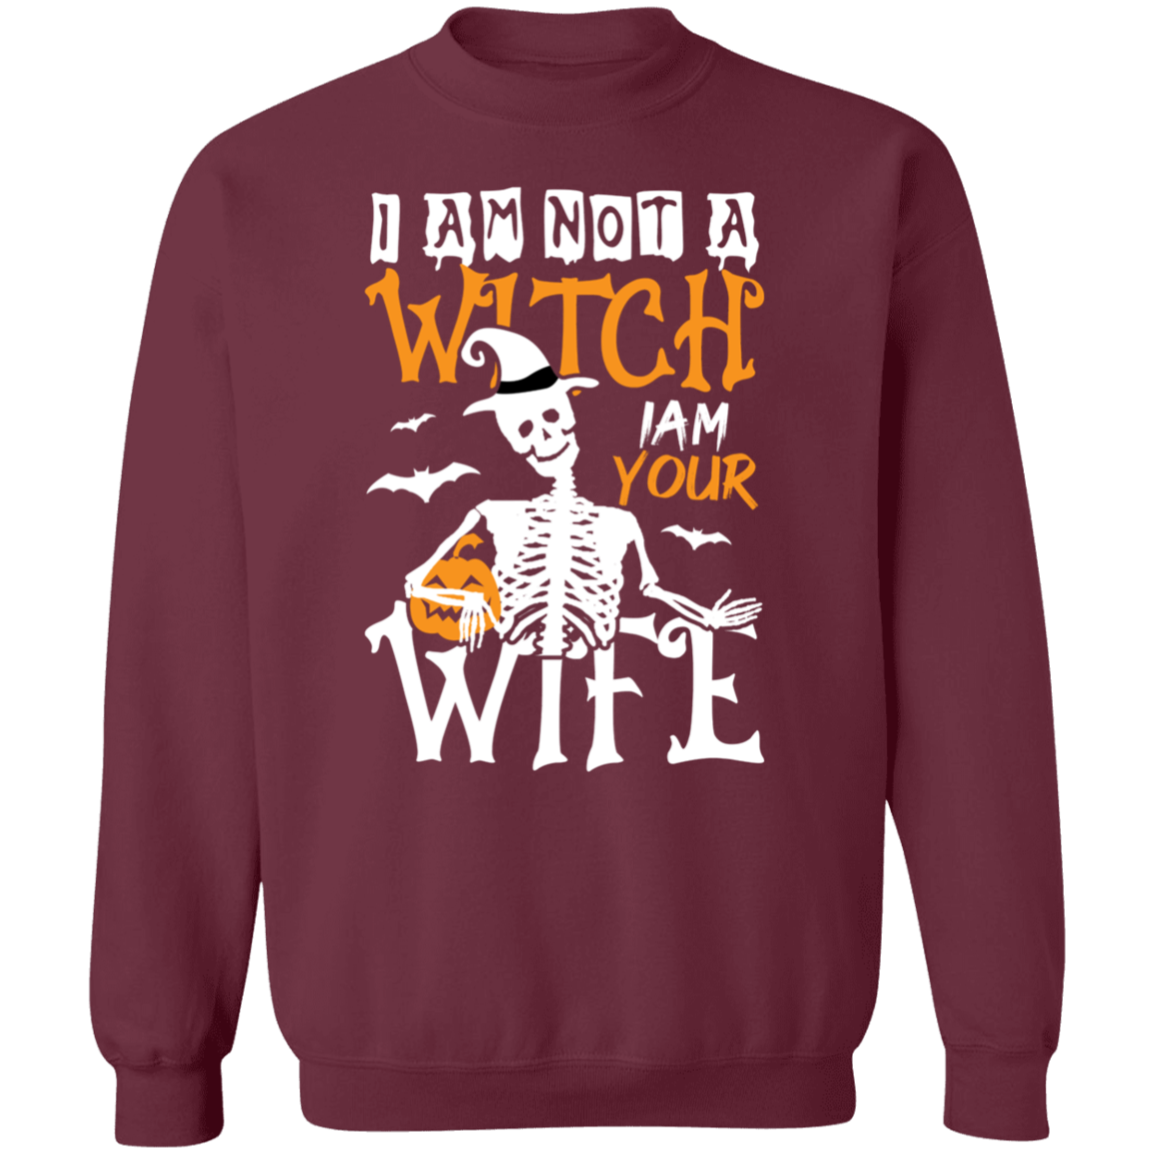 I'M NOT A WITCH - I'M YOUR WIFE SWEATSHIRT